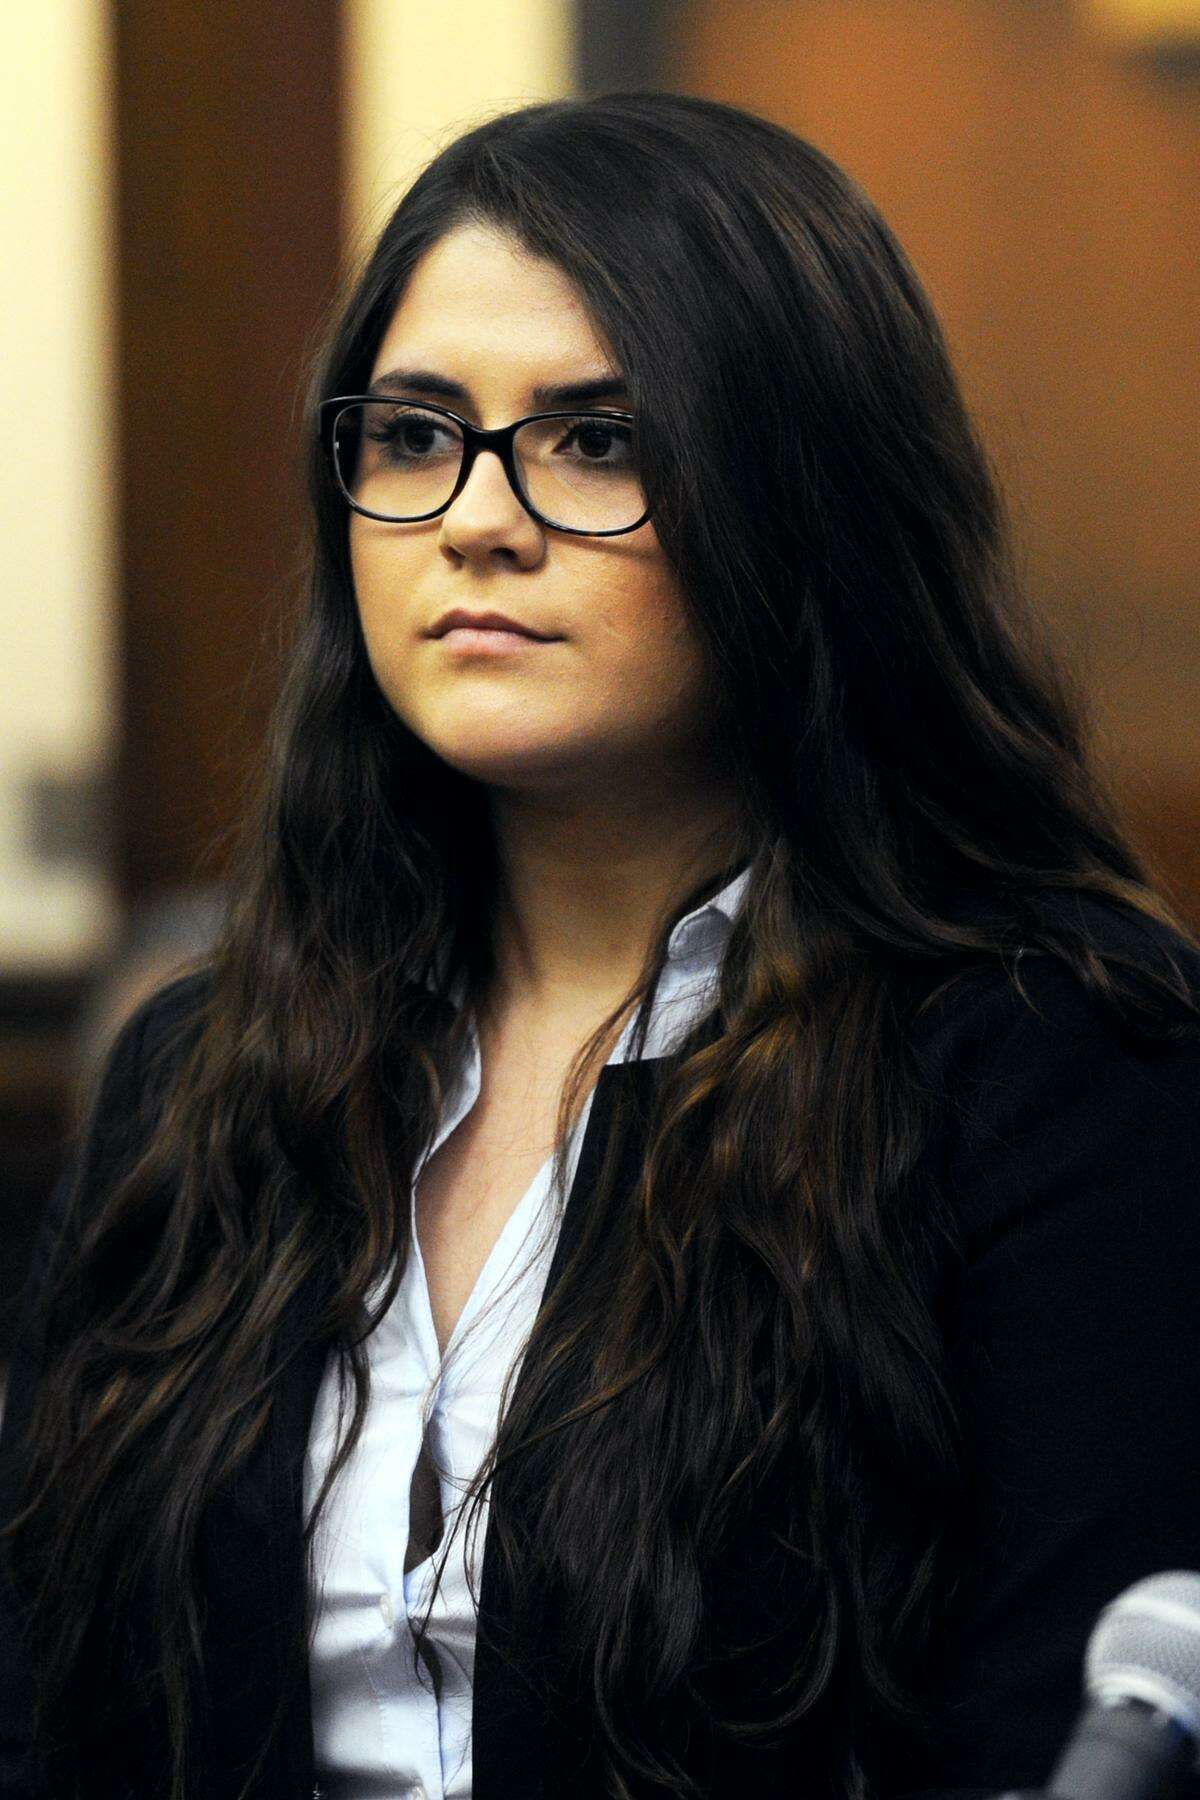 Nikki Yovino in Bridgeport Superior Court in March. Yovino. a former Sacred Heart University student, accused of making up rape allegations against two football players, was denied a pretrial probation program Friday.